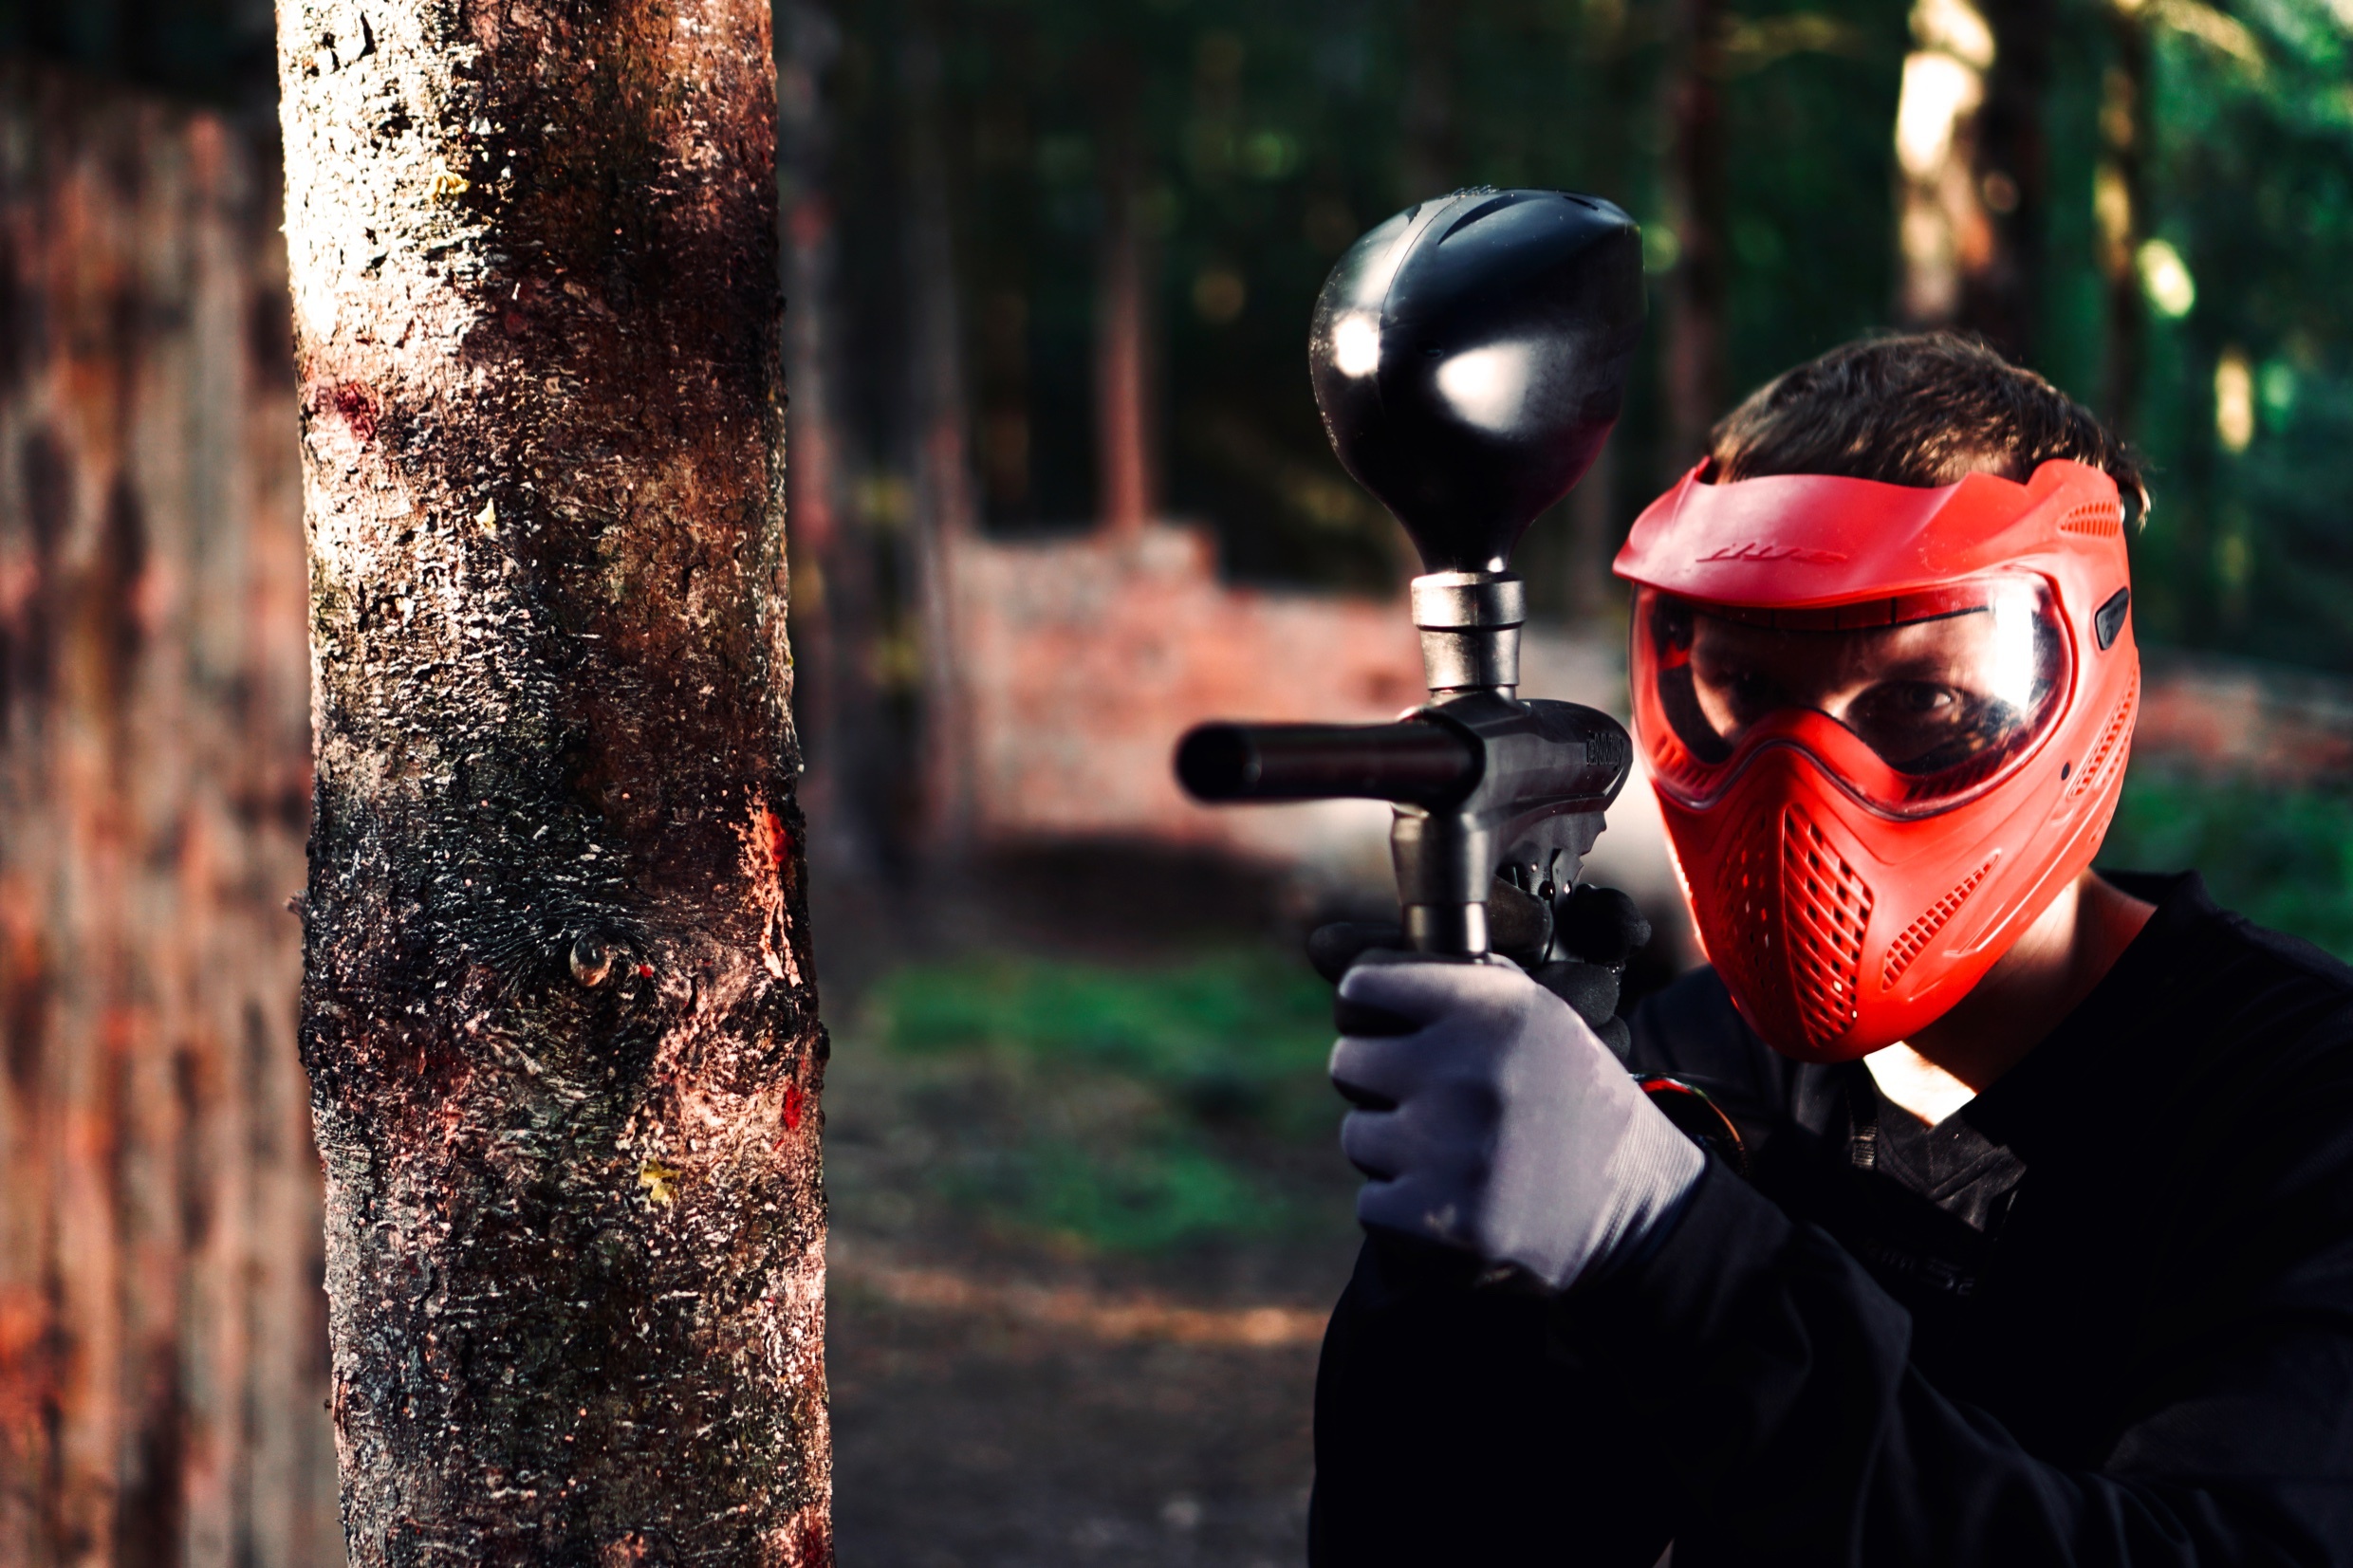 Paintball: A player during the game of a popular style known as "woodsball". 2480x1660 HD Wallpaper.